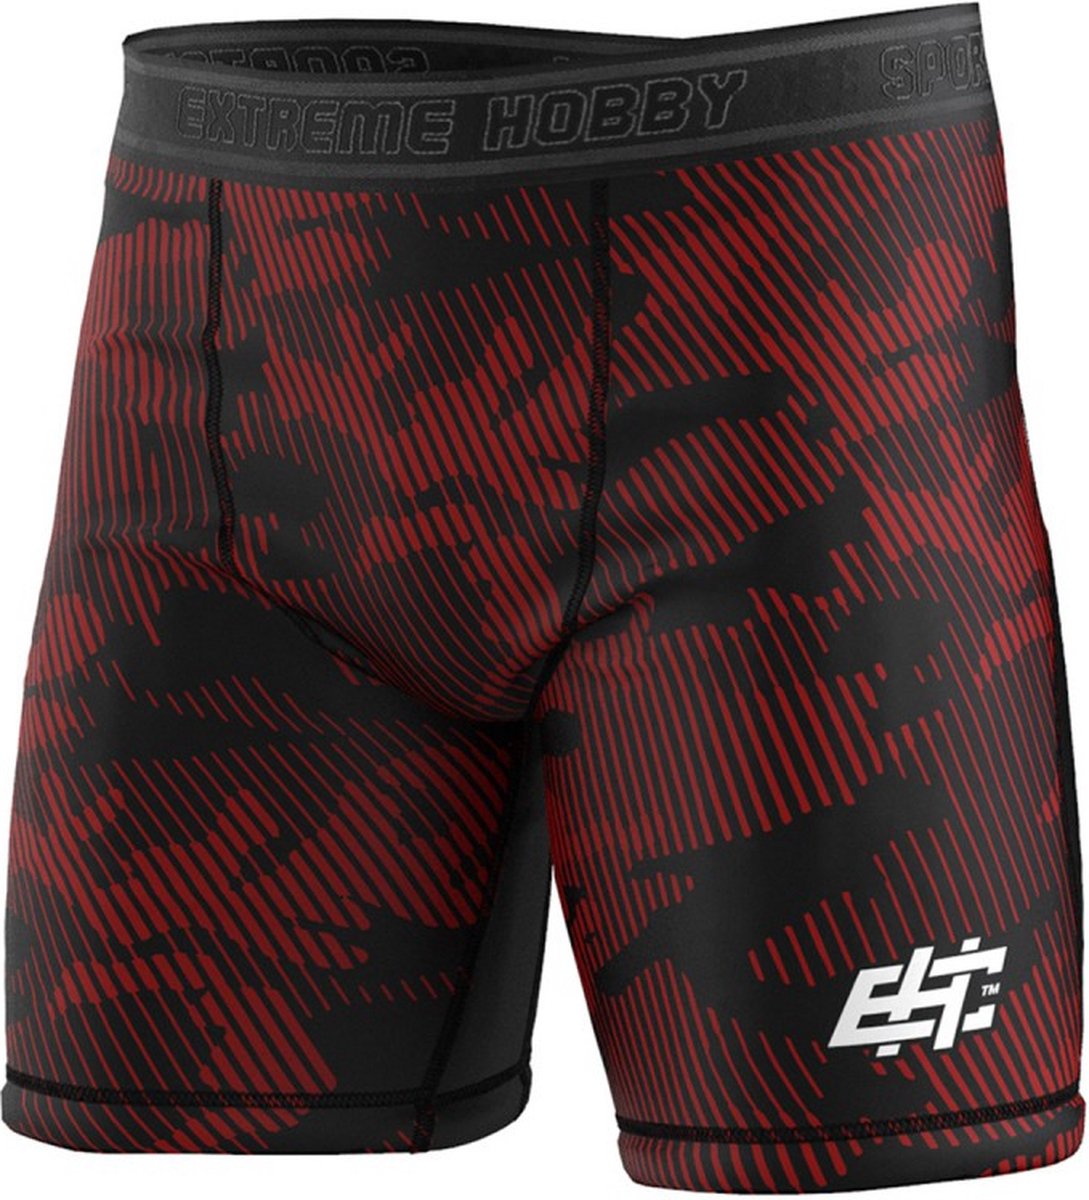 Extreme Hobby - Havoc Red - Vale Tudo Shorts - Compression Shorts - Rood, Zwaart - Maat L